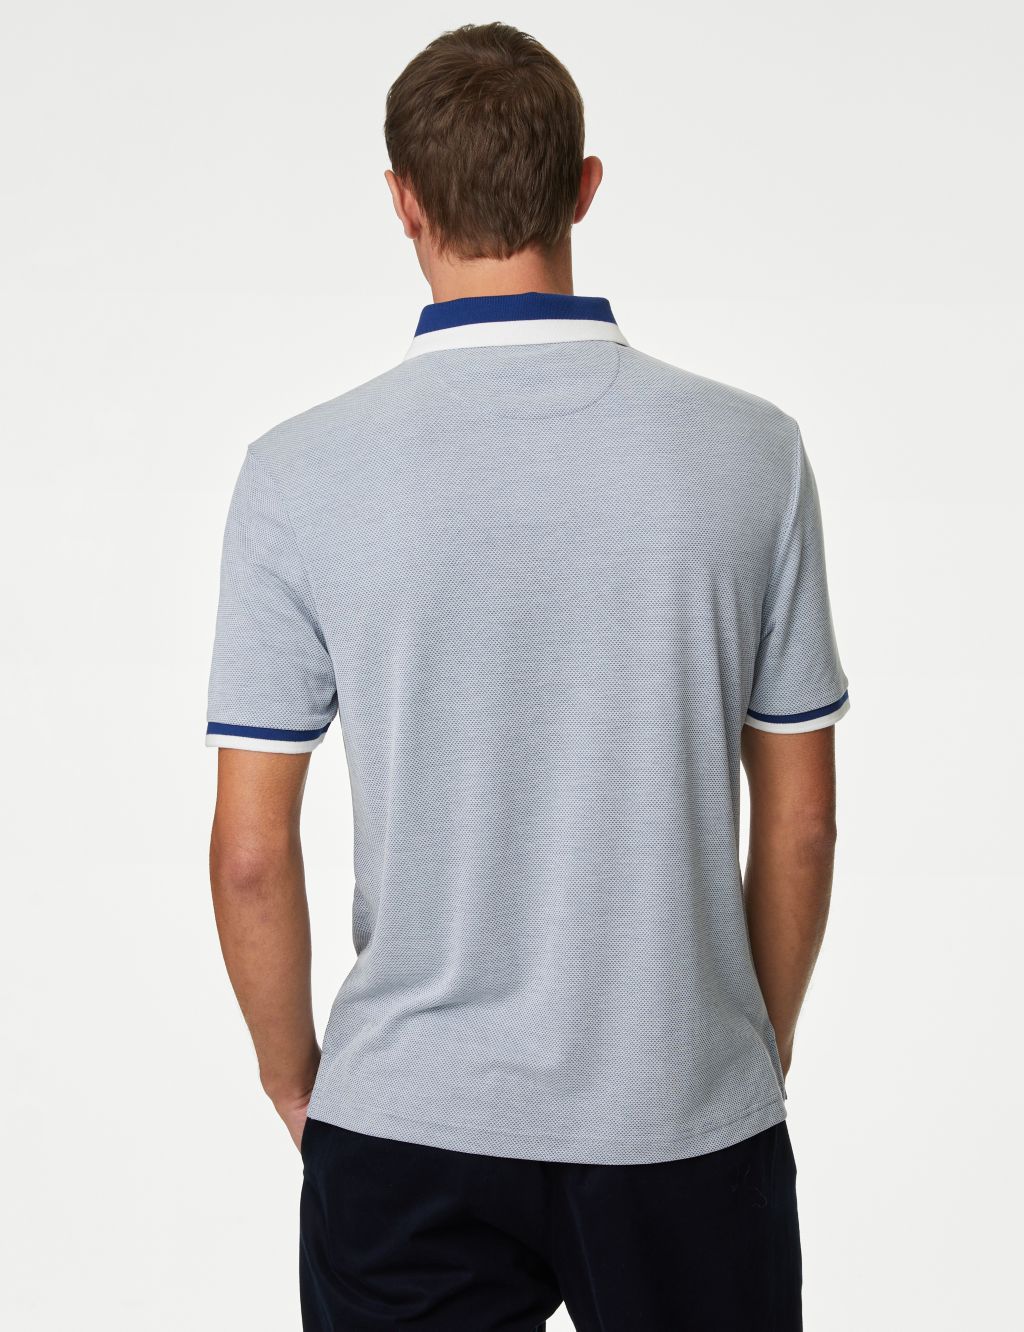 Tipped Polo Shirt image 5